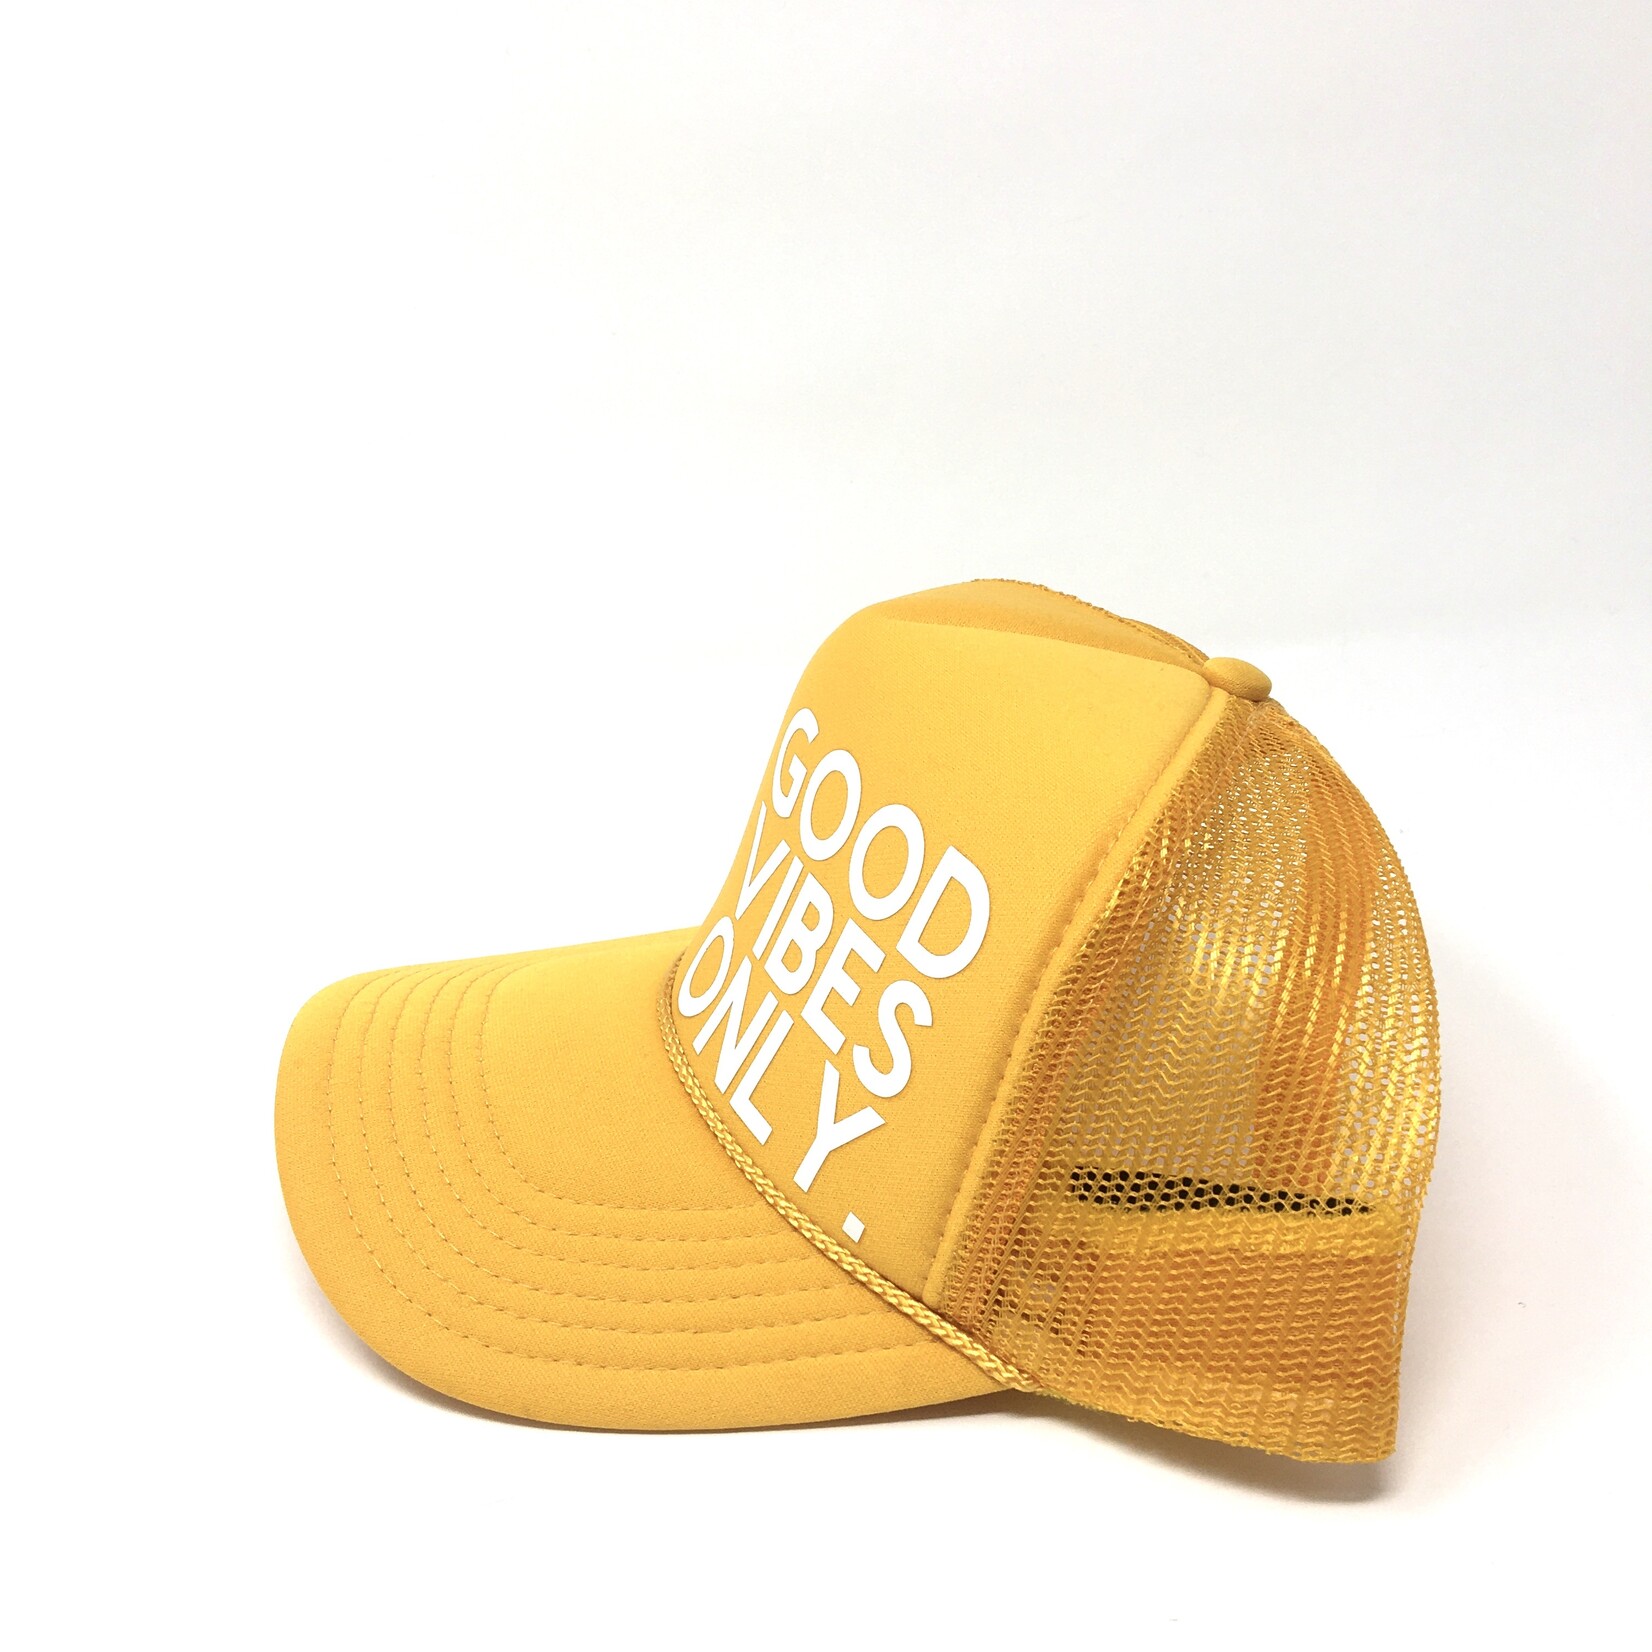 Après Babe "Good Vibes Only" Trucker Hats